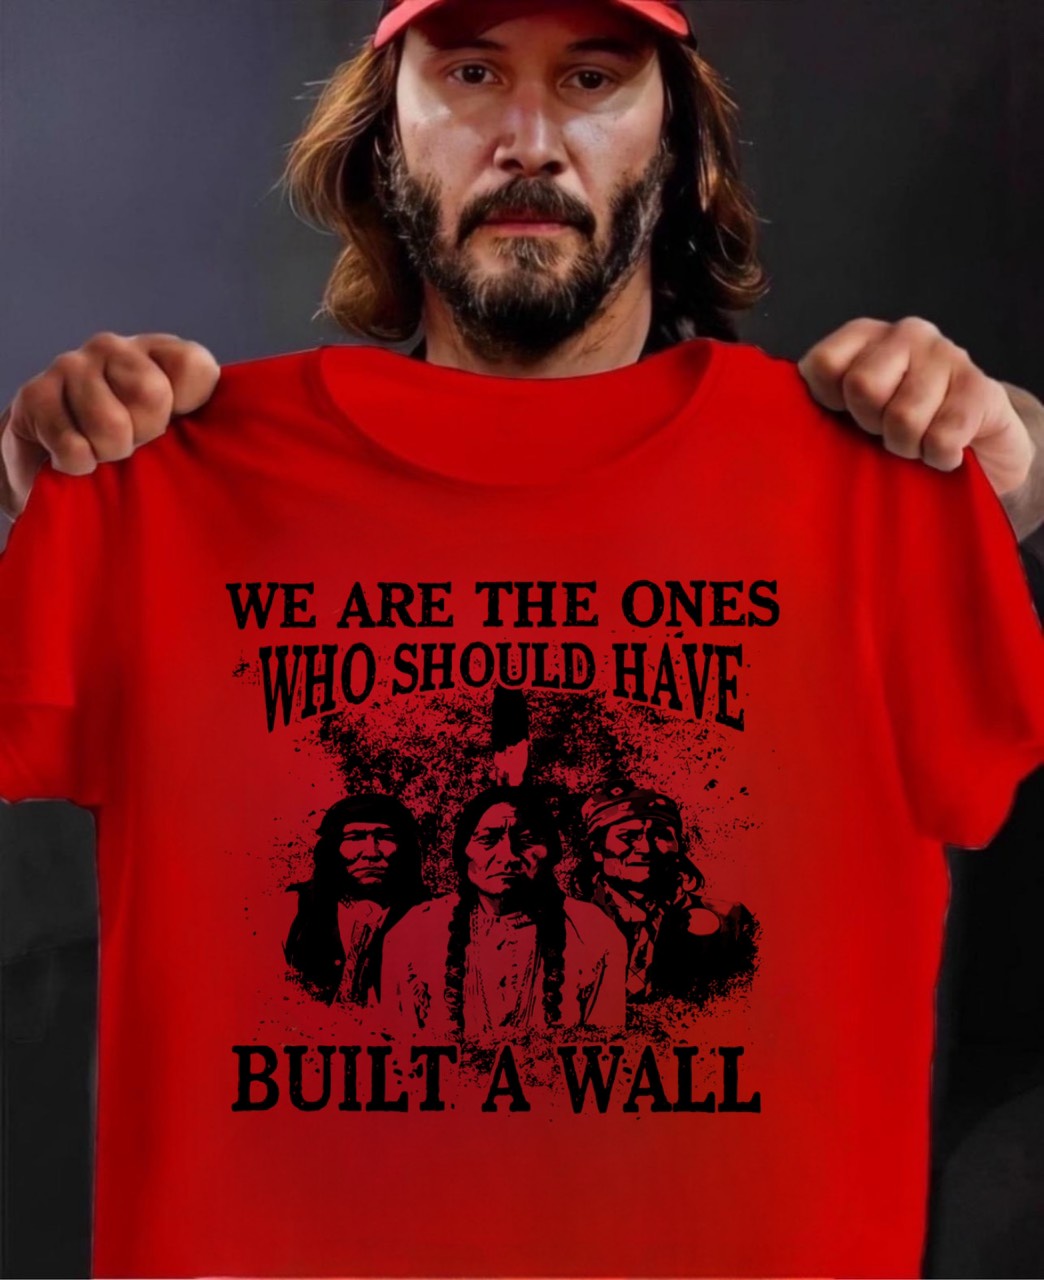 Keanu Reeves holding T-Shirt: "We are the ones who should have built a wall"